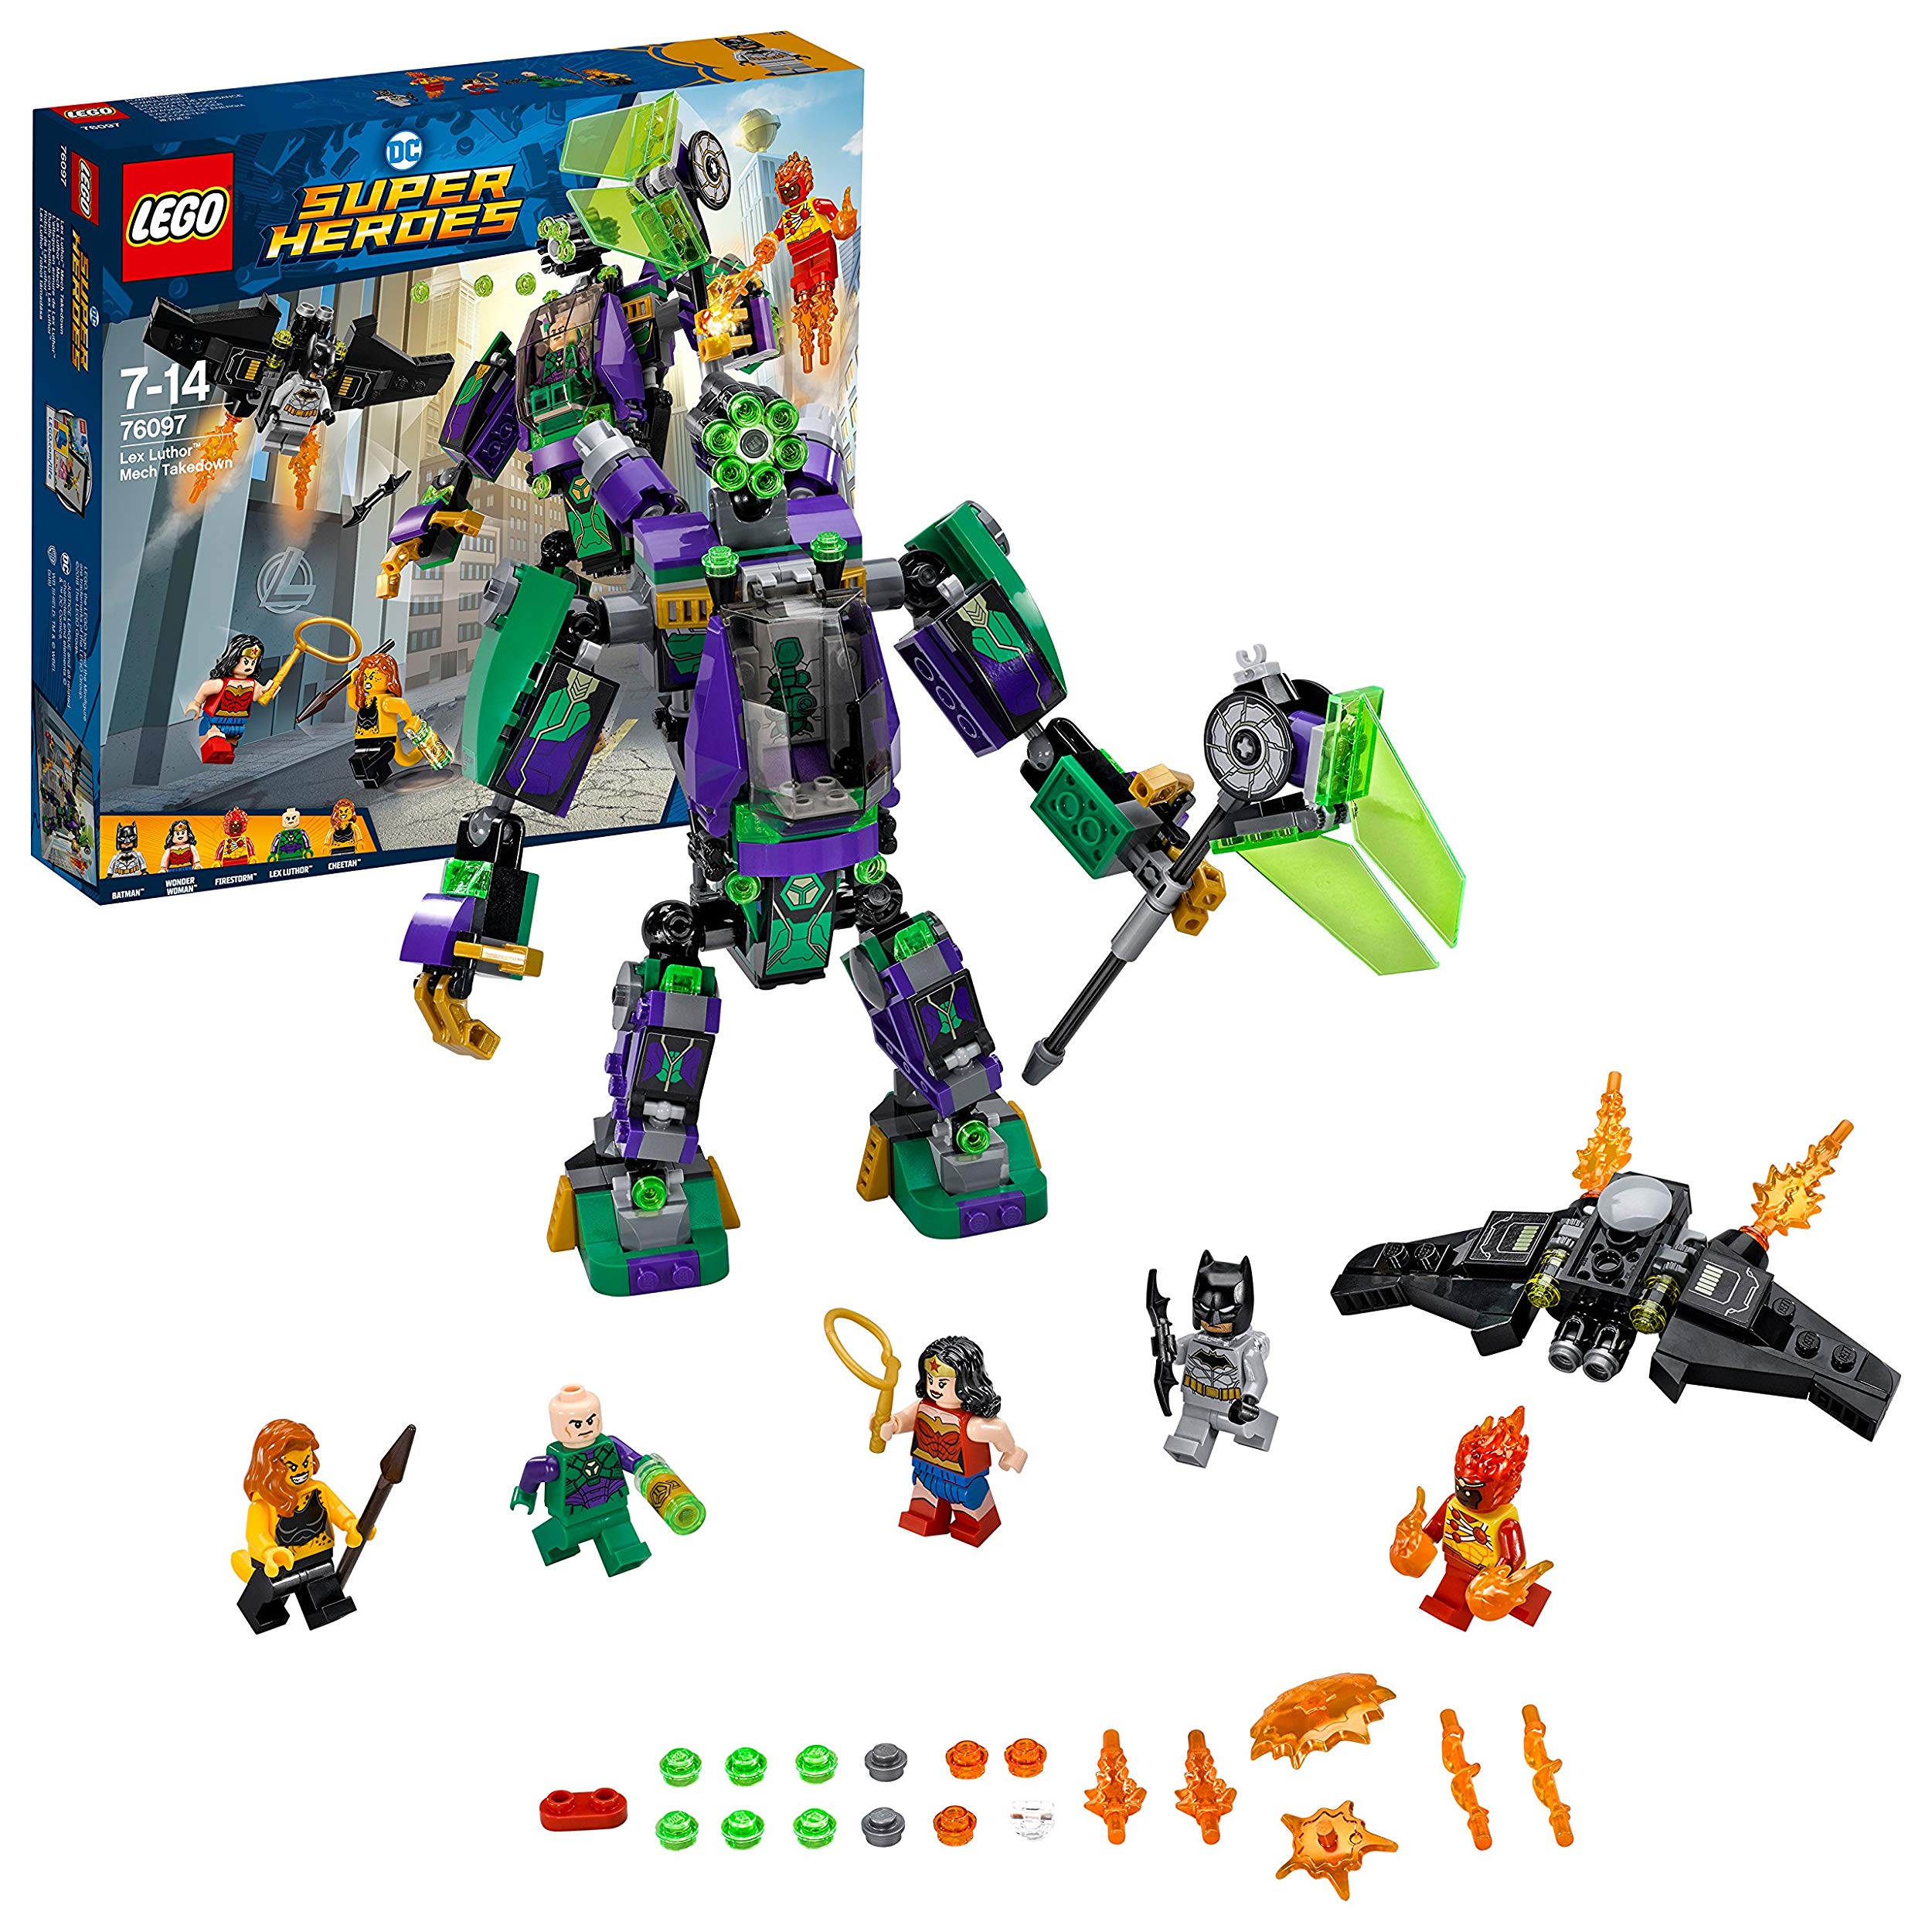 Lego Dc Super Heroes Lex Luthor Mech Superhero Toy For Boys And Girls